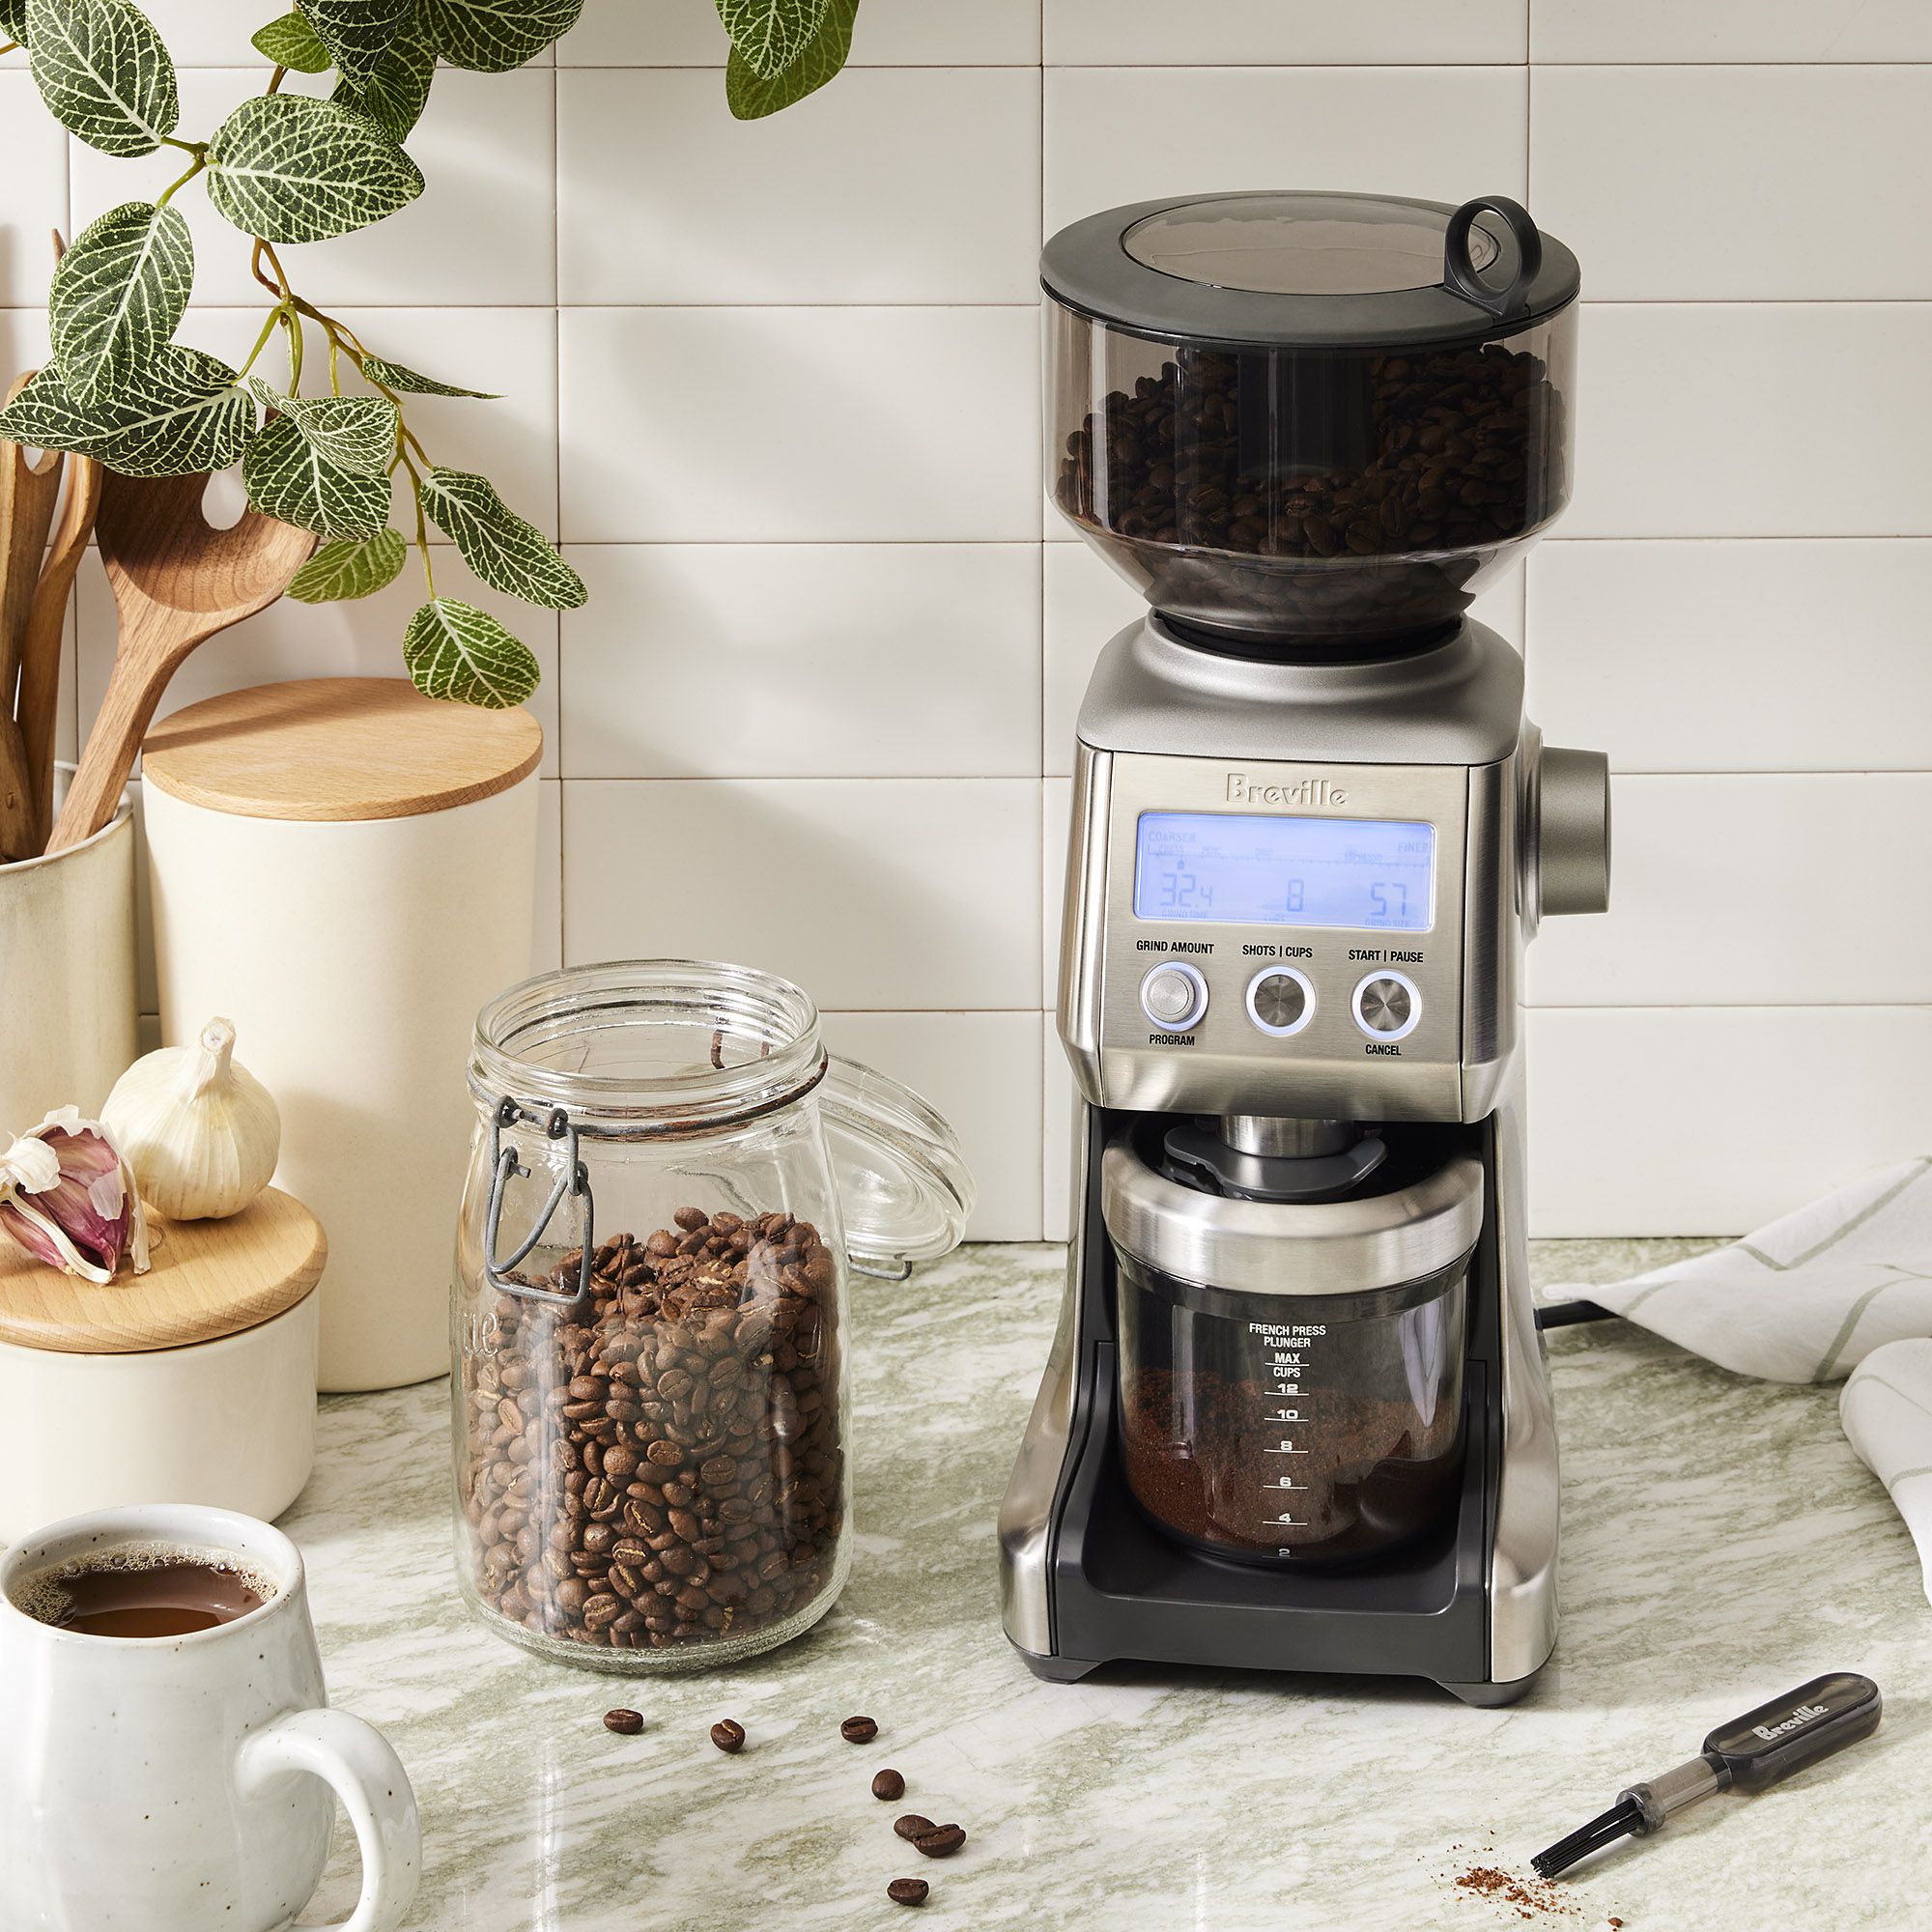 Breville Grind Control 12-Cup Coffee Maker - Cooks